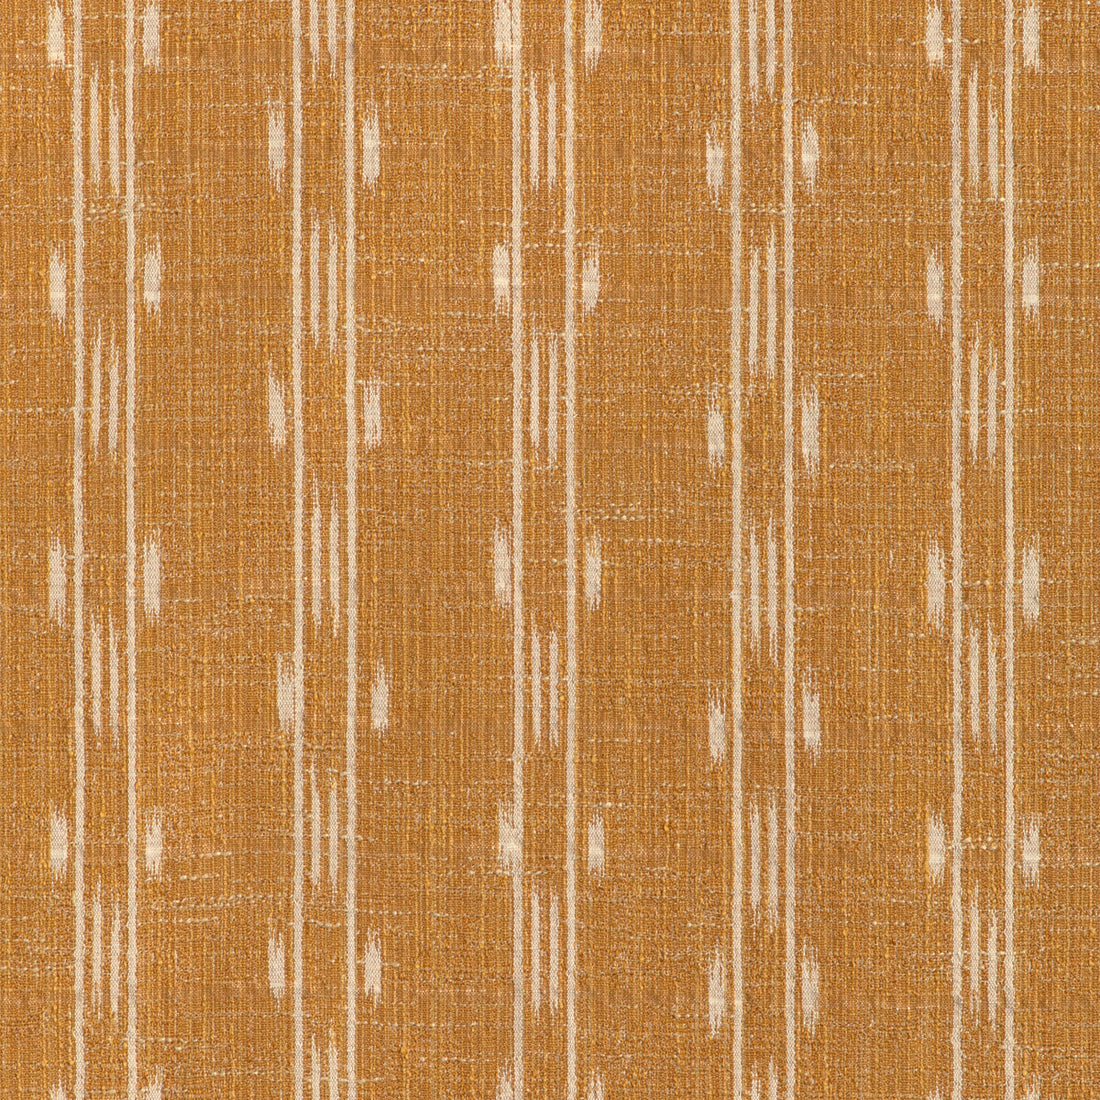 Le Spritz Weave fabric in ochre color - pattern 8024119.4.0 - by Brunschwig &amp; Fils in the Les Ensembliers L&